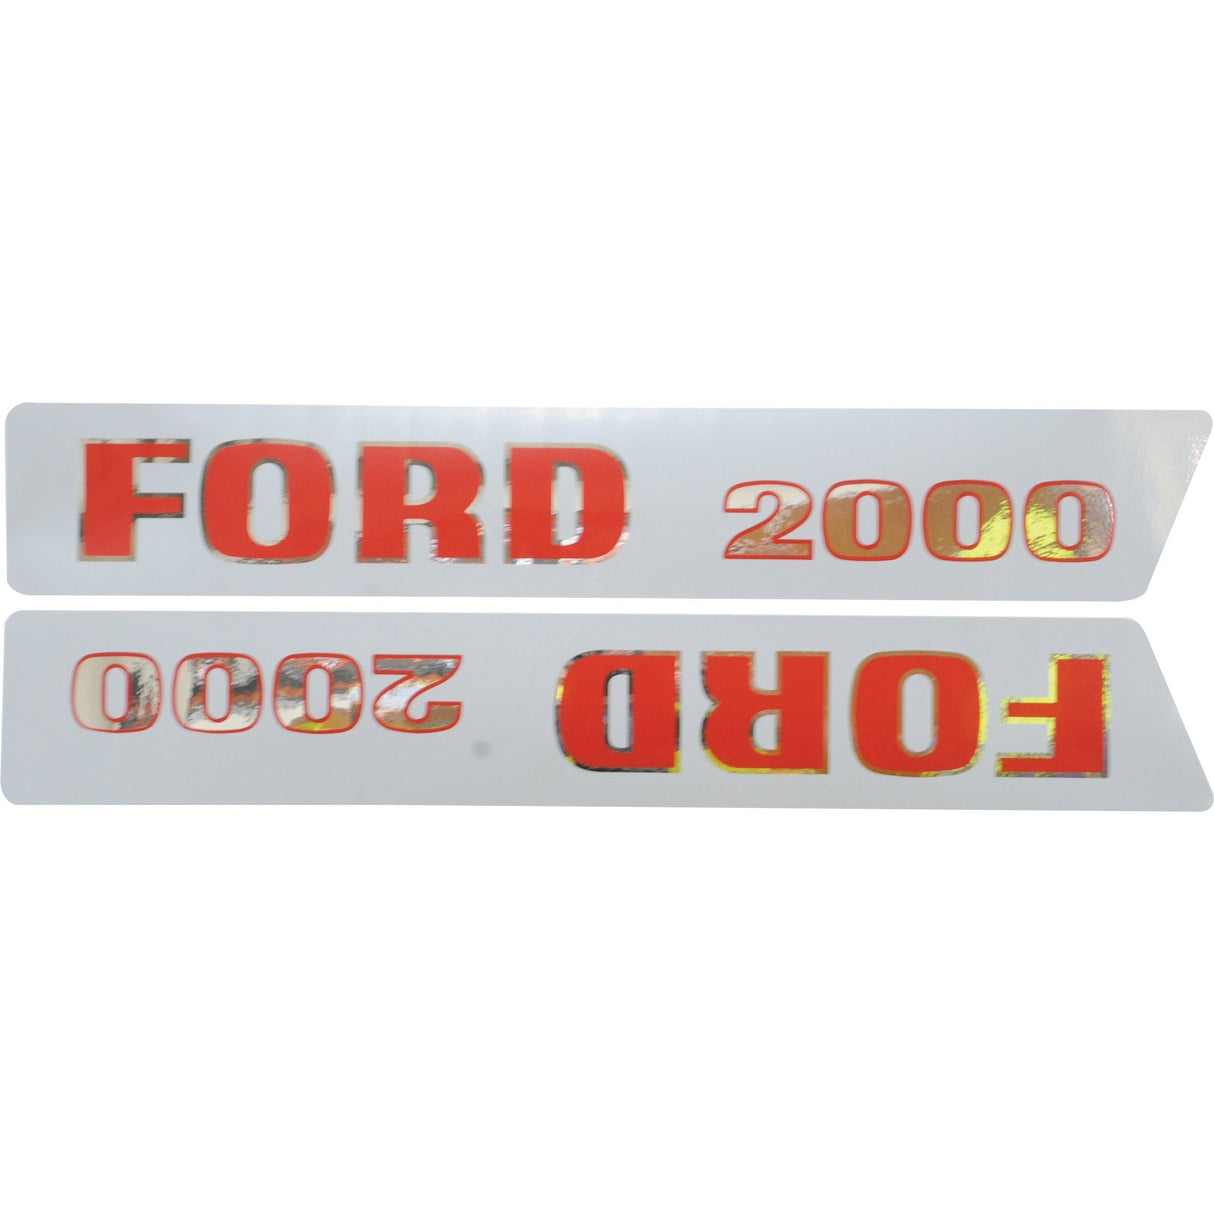 Decal Set - Ford / New Holland 2000
 - S.8534 - Farming Parts